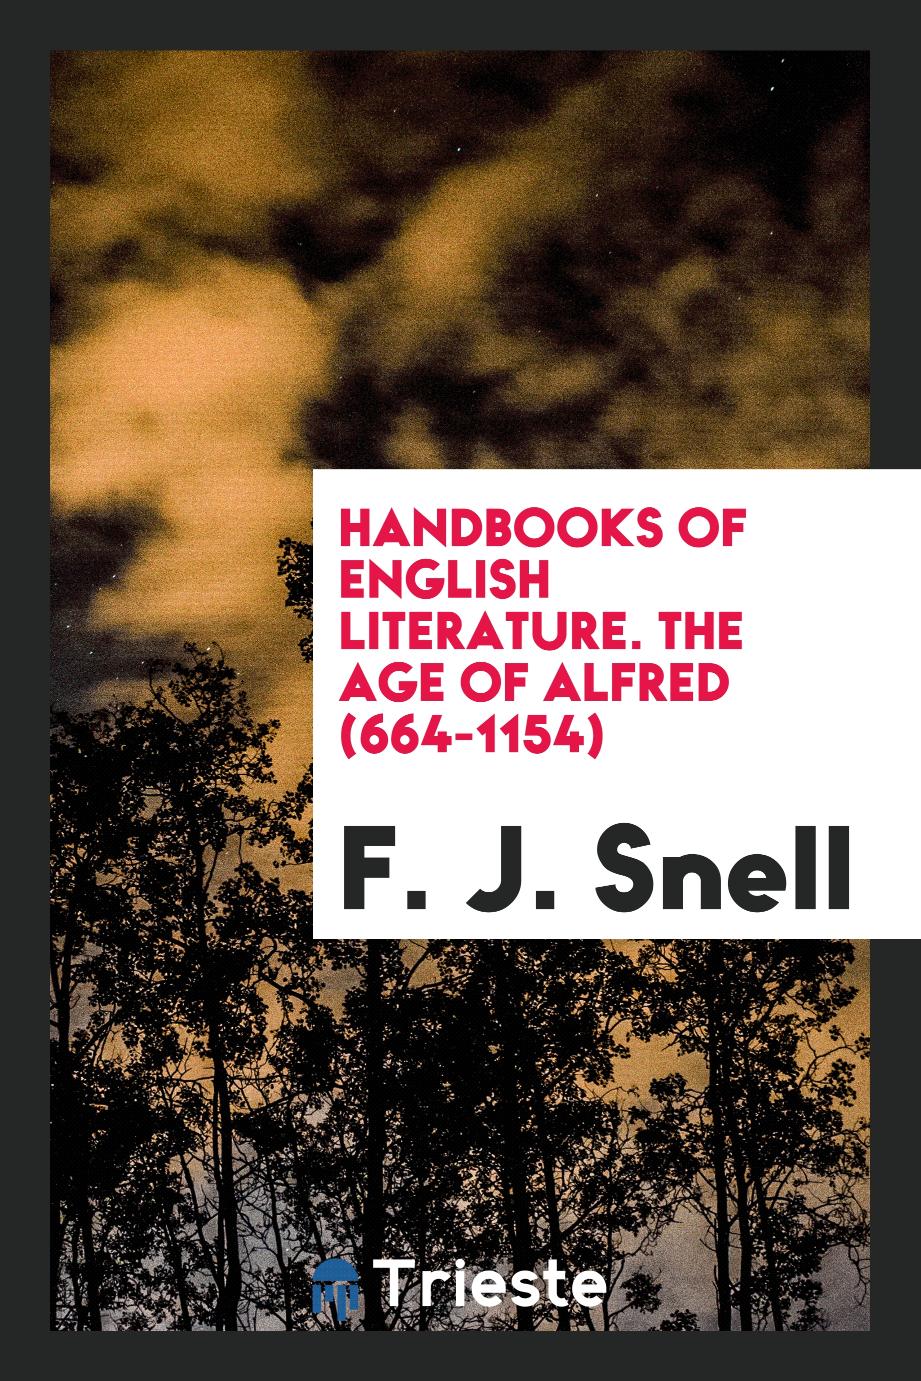 Handbooks of English Literature. The age of Alfred (664-1154)